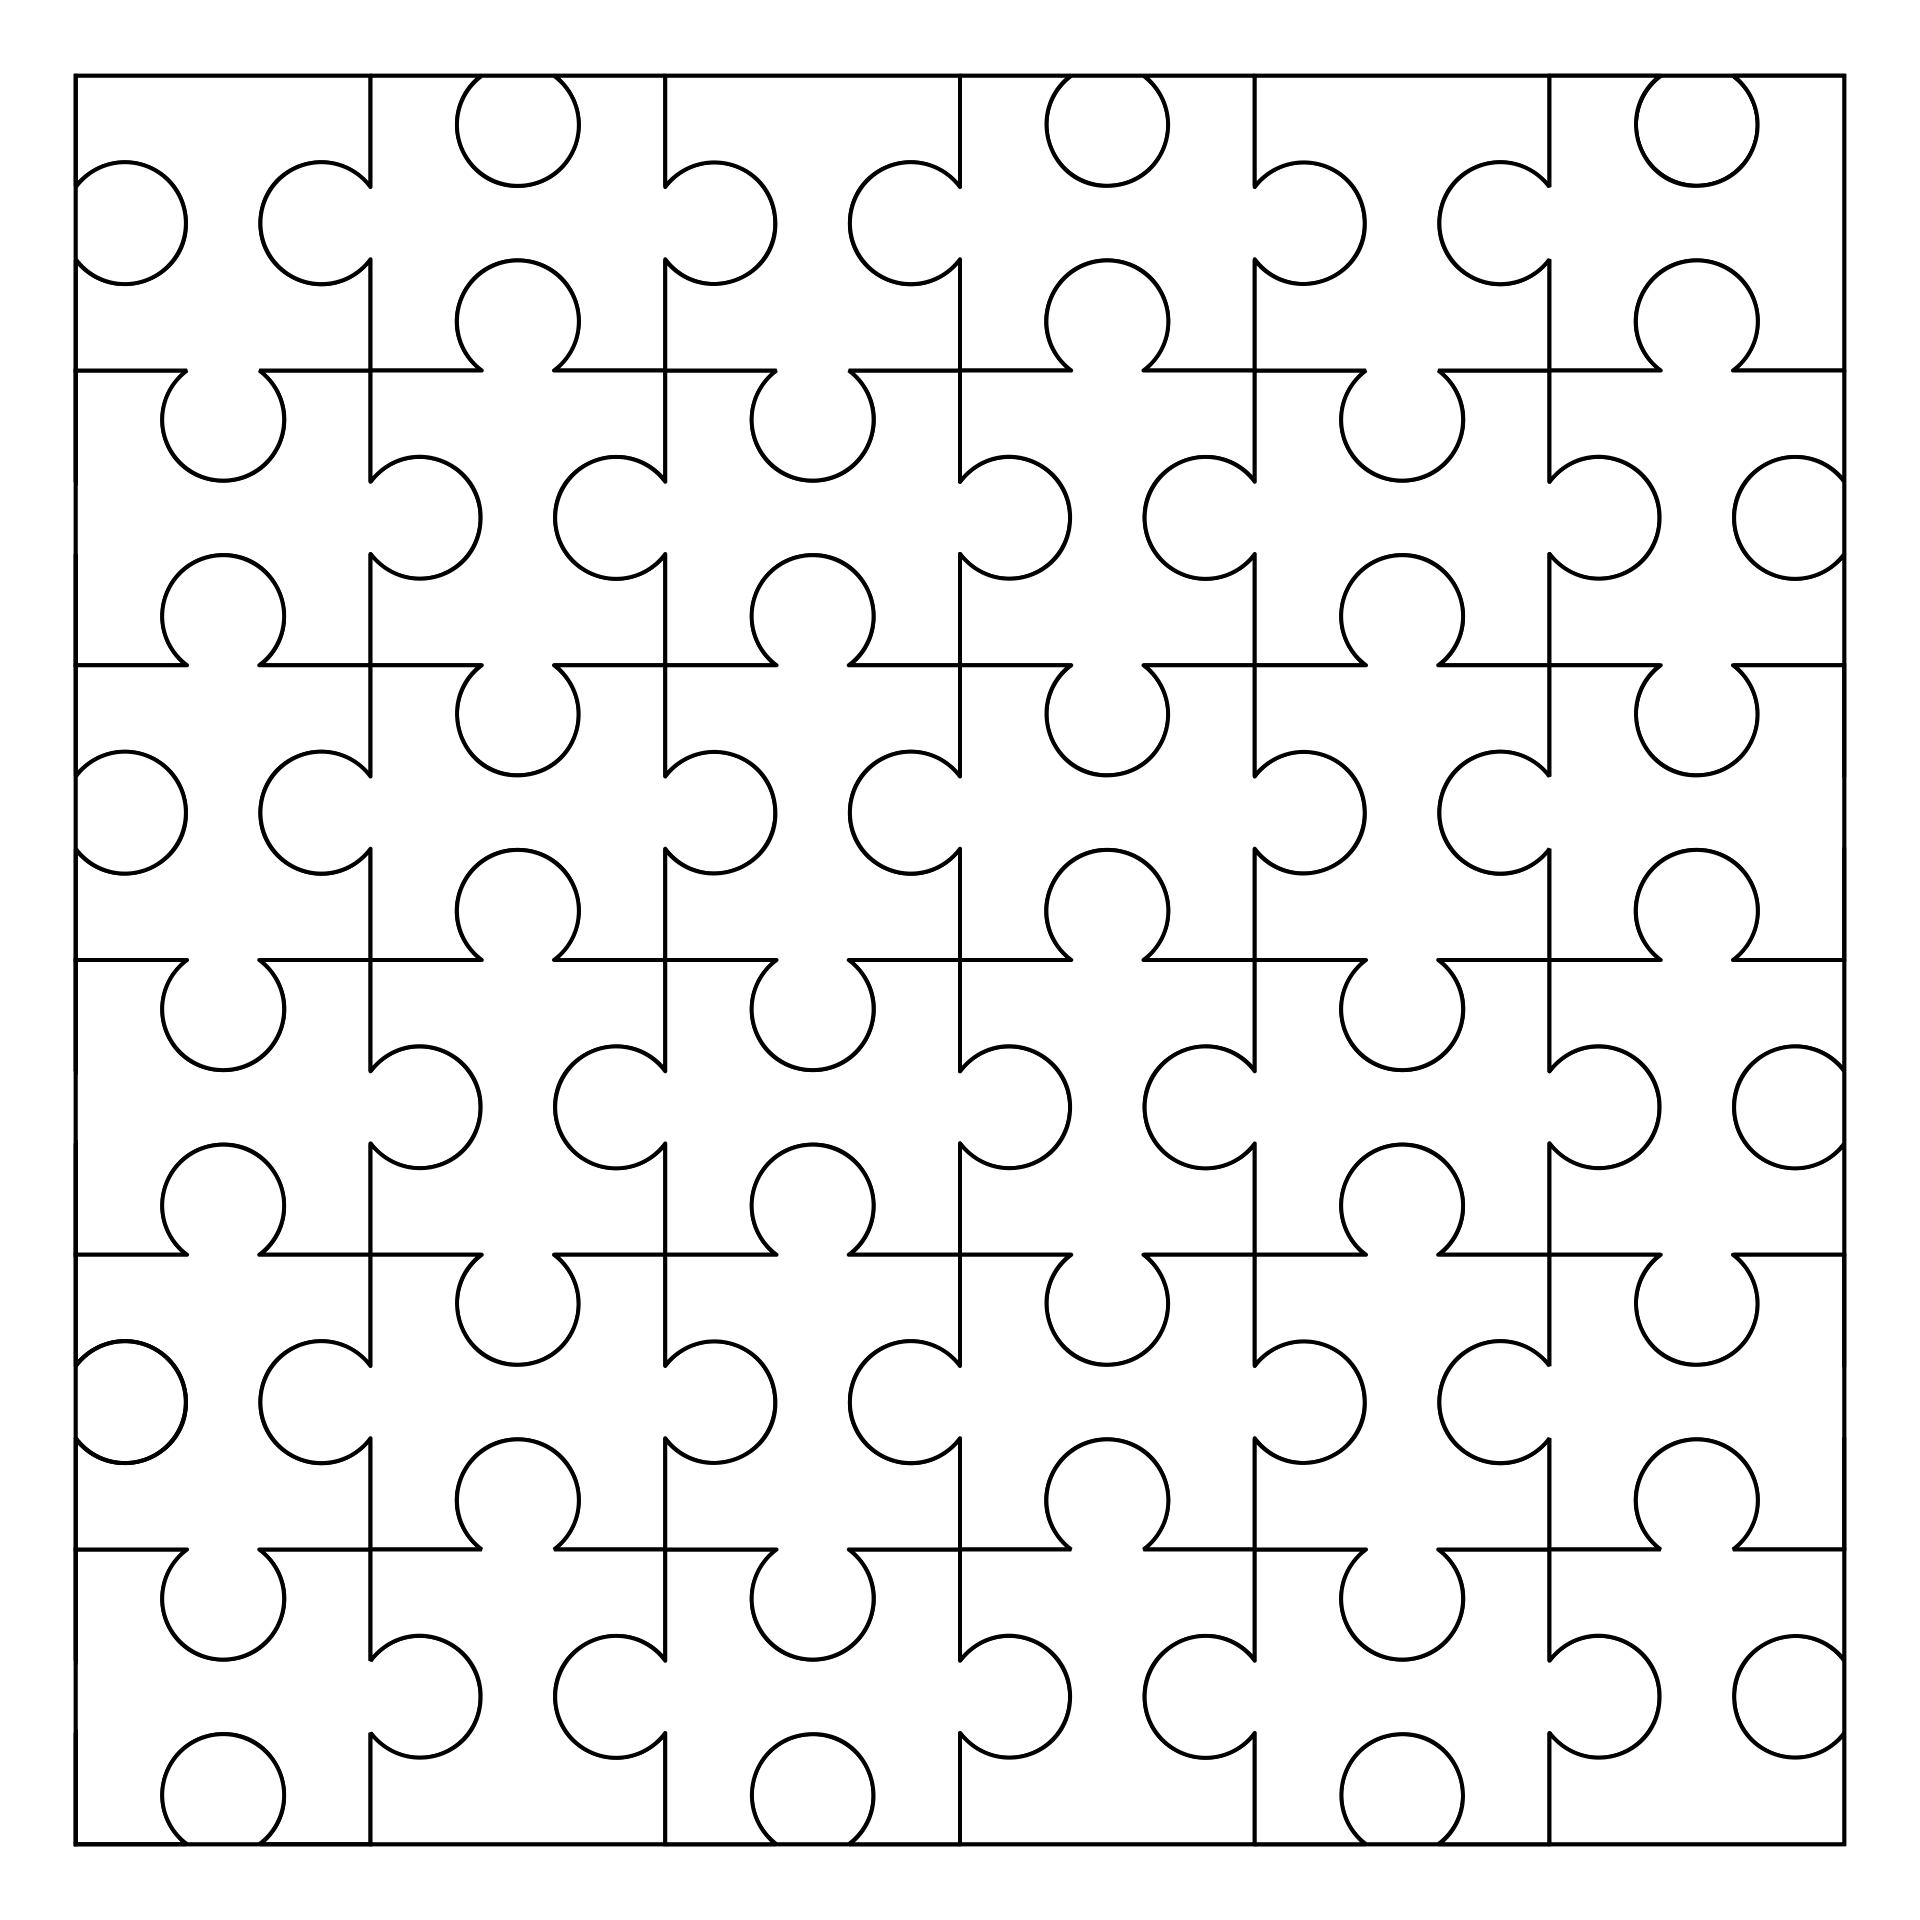 10-best-9-piece-jigsaw-puzzle-template-printable-pdf-for-free-at-printablee